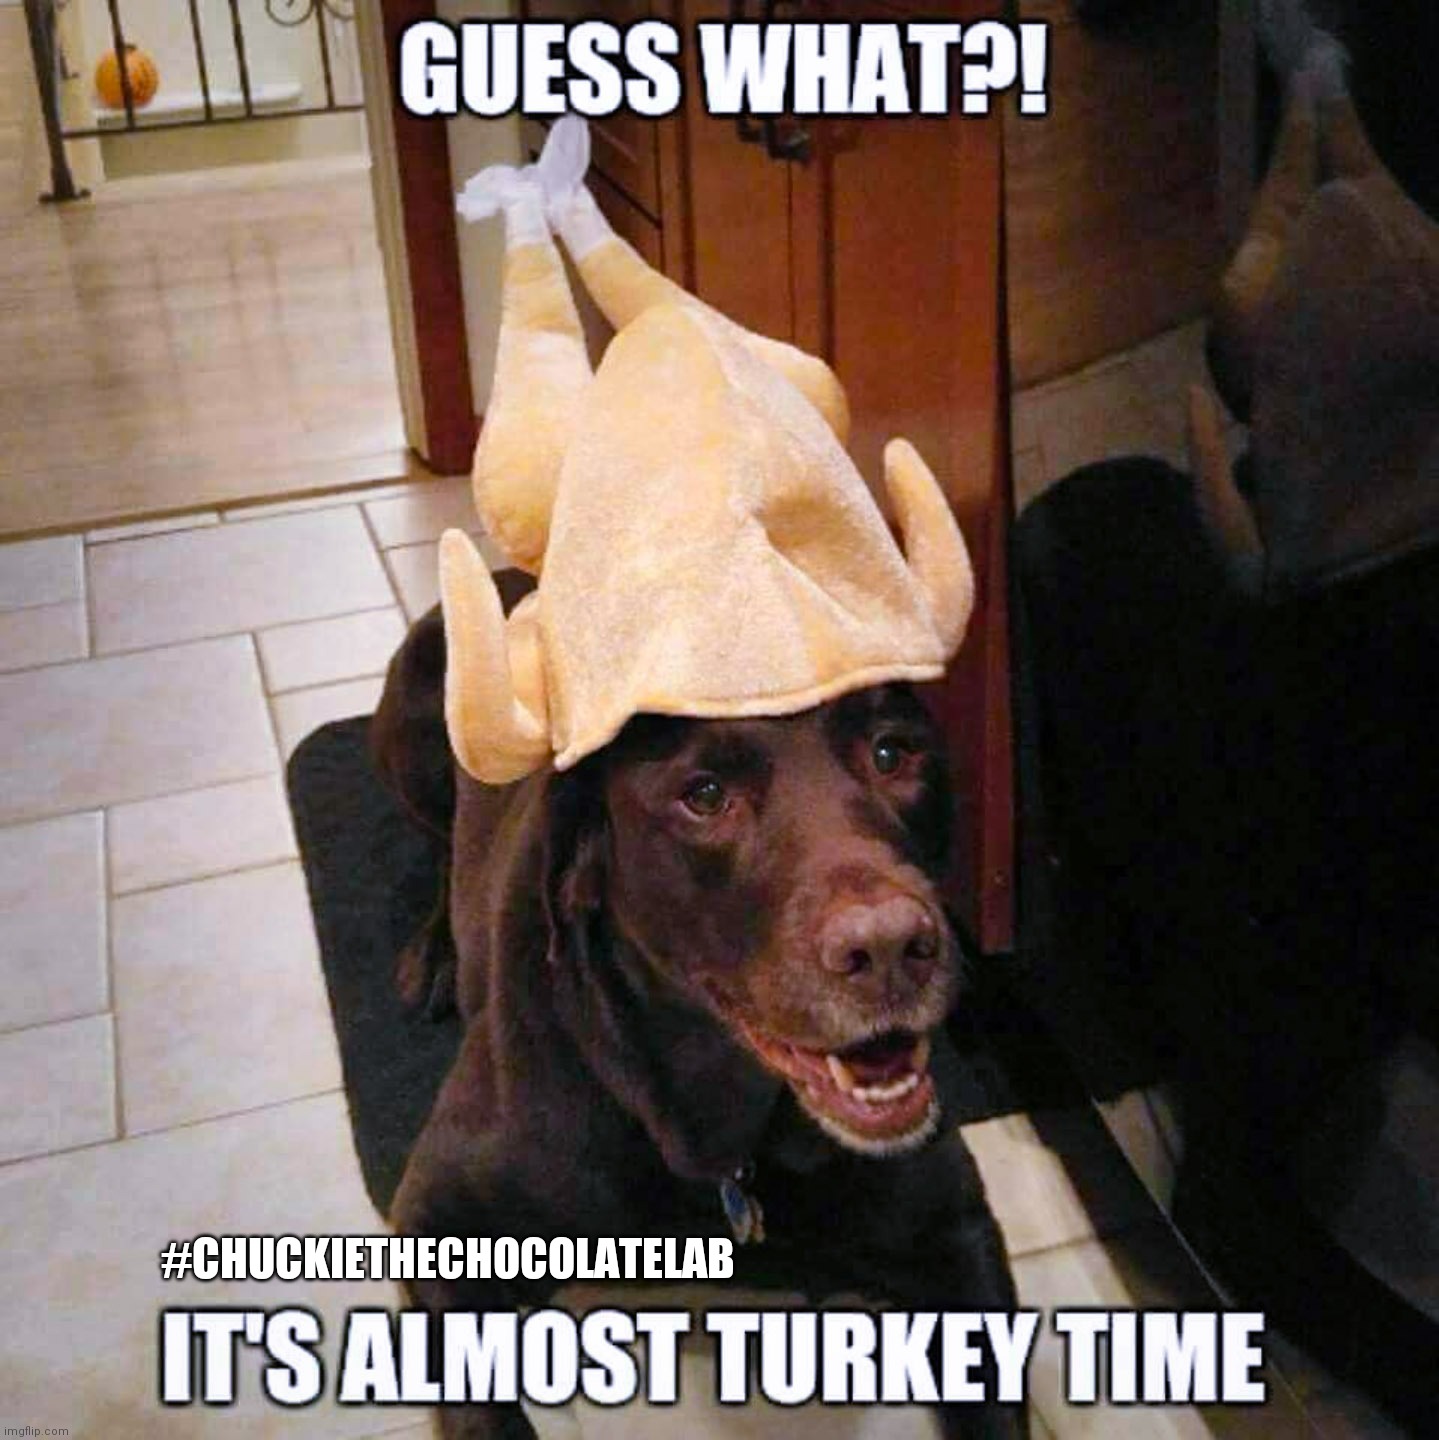 Almost Turkey Time! | #CHUCKIETHECHOCOLATELAB | image tagged in chuckie the chocolate lab,turkey day,thanksgiving,dogs,memes,funny | made w/ Imgflip meme maker